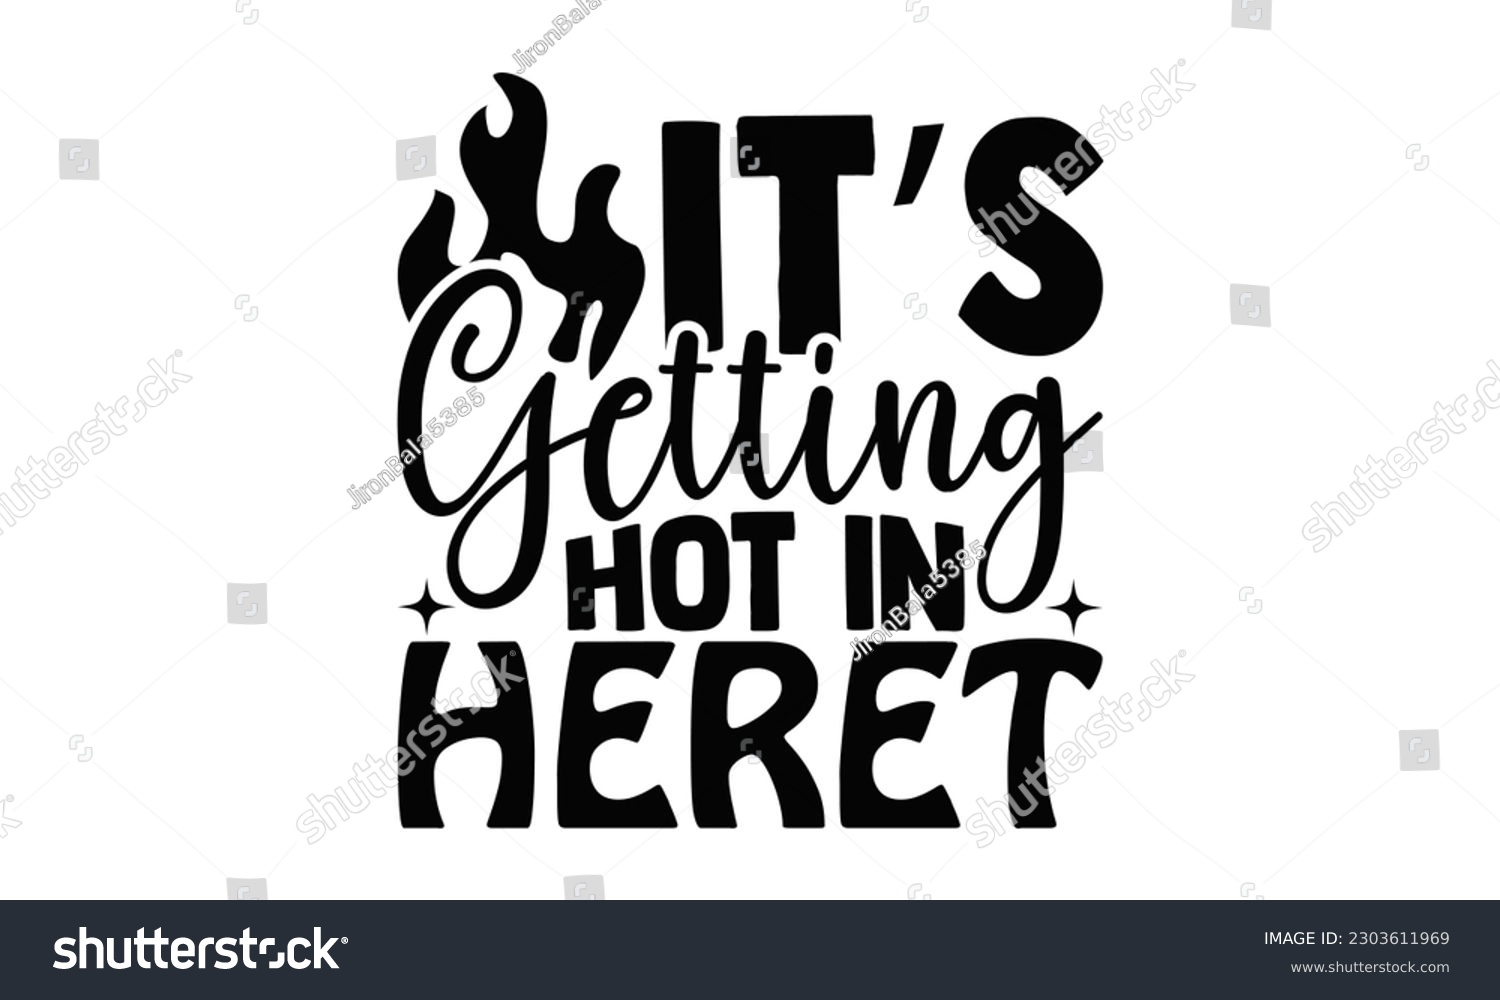 SVG of It’s Getting Hot In Here - Barbecue SVG Design, Calligraphy t shirt design, Illustration for prints on t-shirts, bags, posters, cards and Mug.
 svg